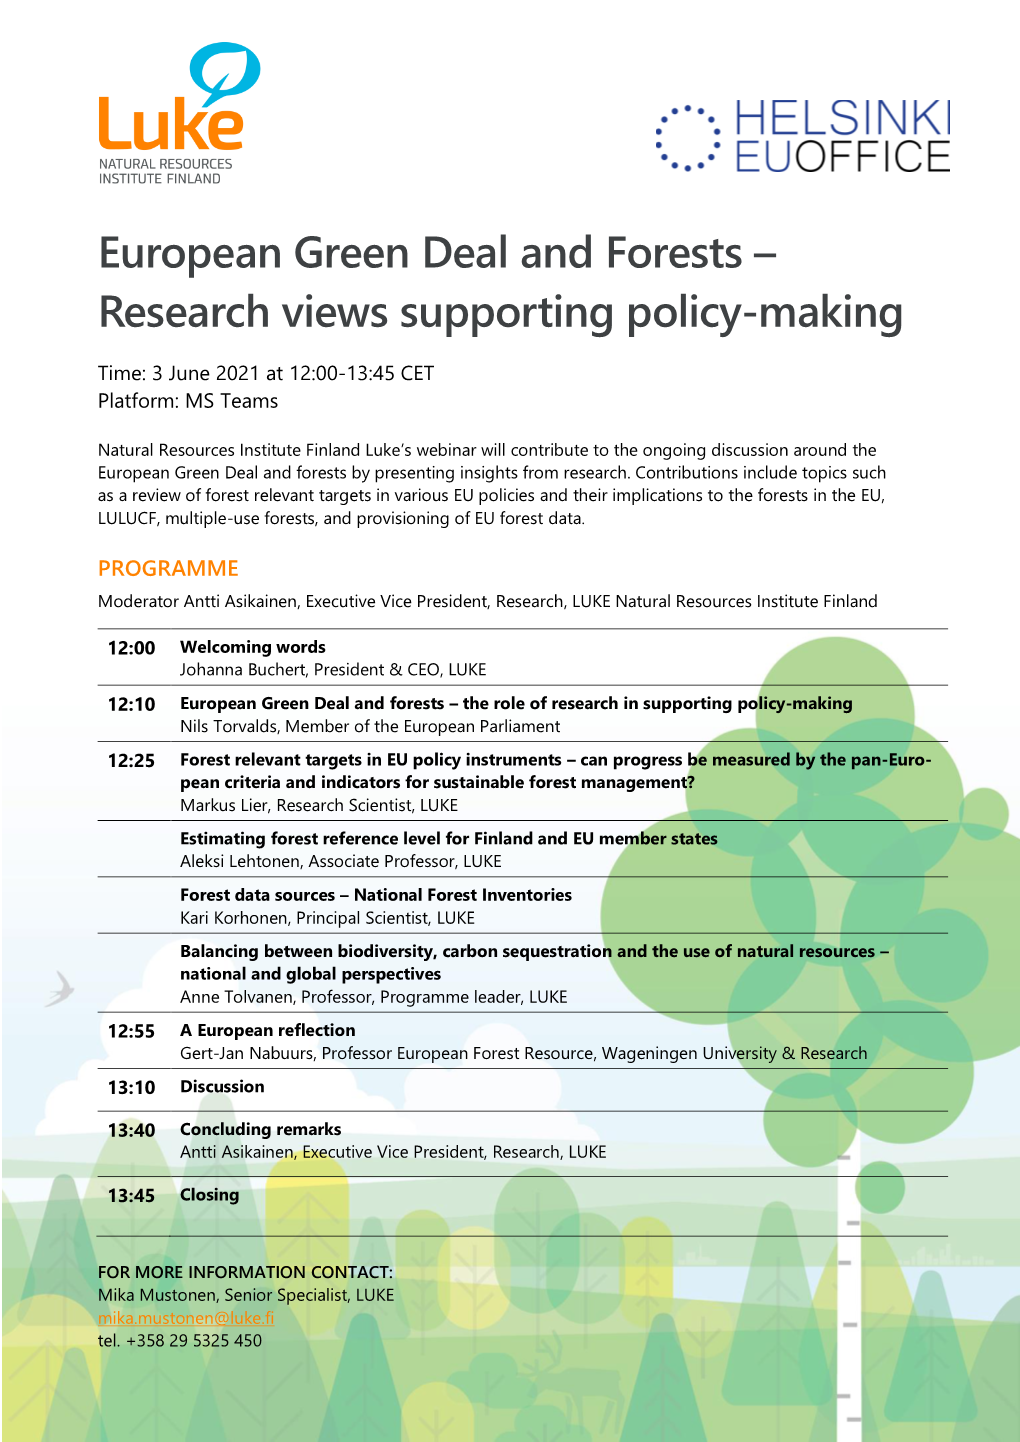 European Green Deal and Forests – Research Views Supporting Policy-Making